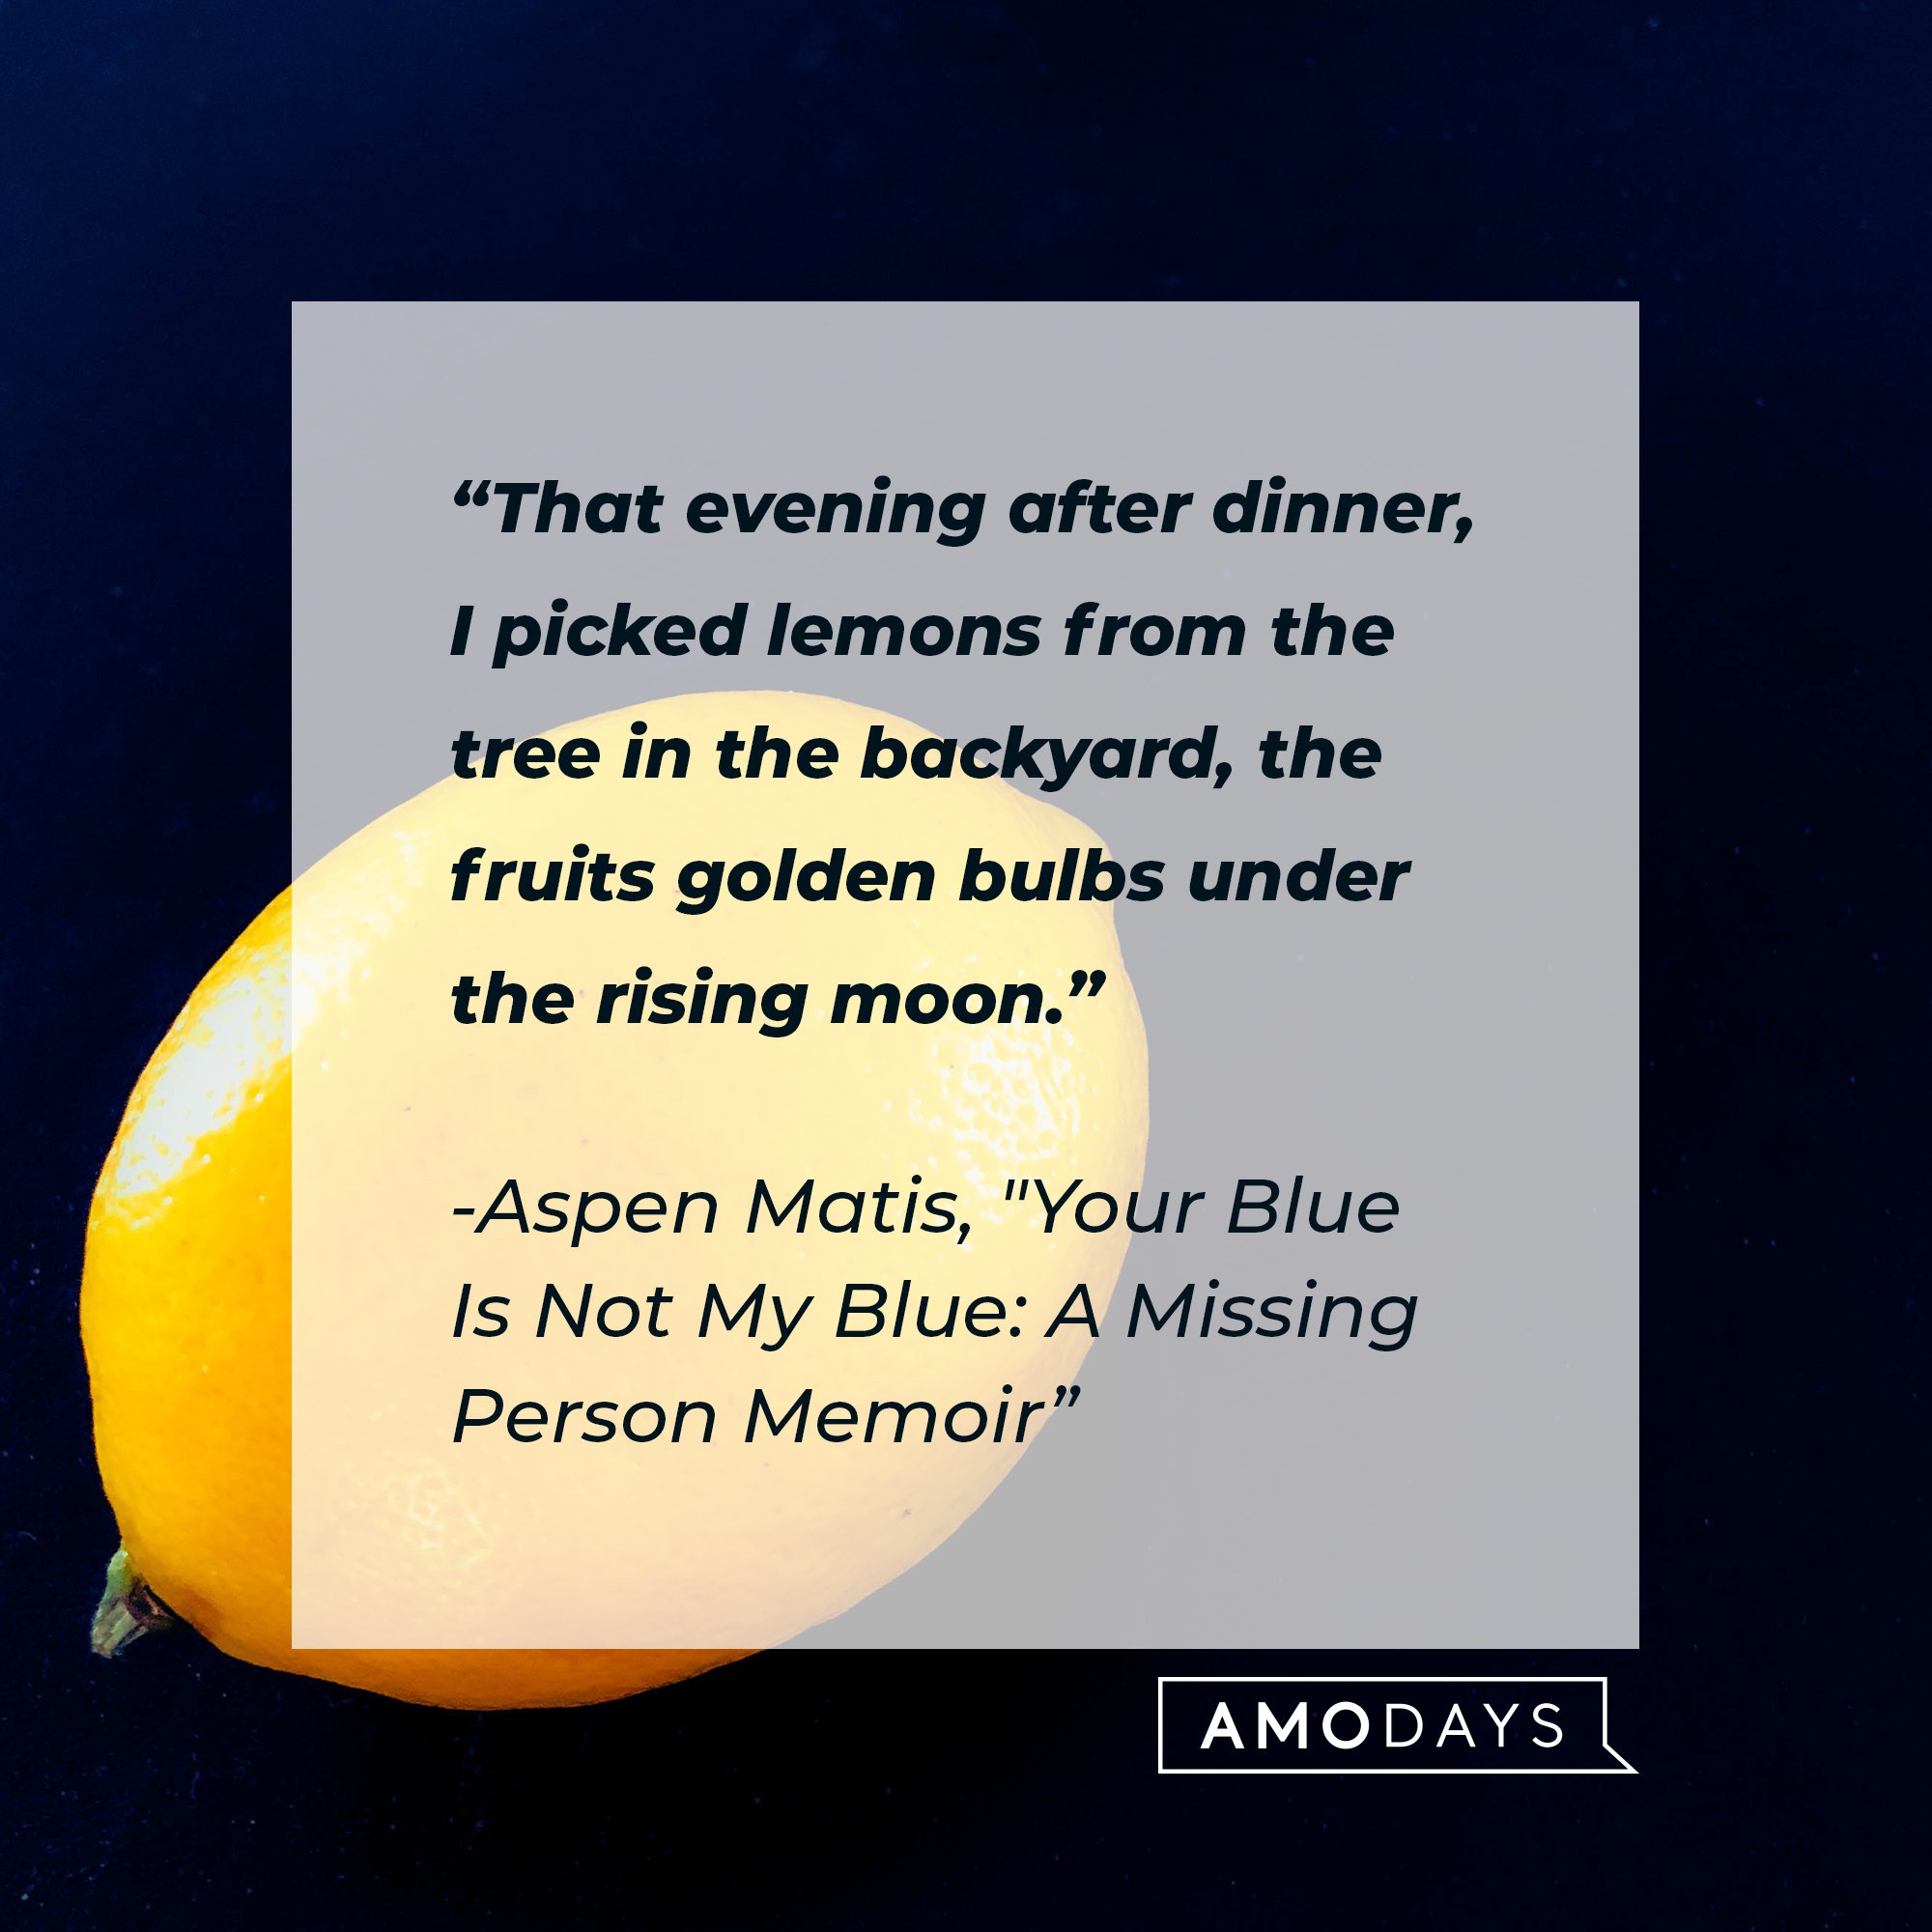 Aspen Matis’ quote from "Your Blue Is Not My Blue: A Missing Person Memoir”:"That evening after dinner, I picked lemons from the tree in the backyard, the fruits golden bulbs under the rising moon." | Image: AmoDays 